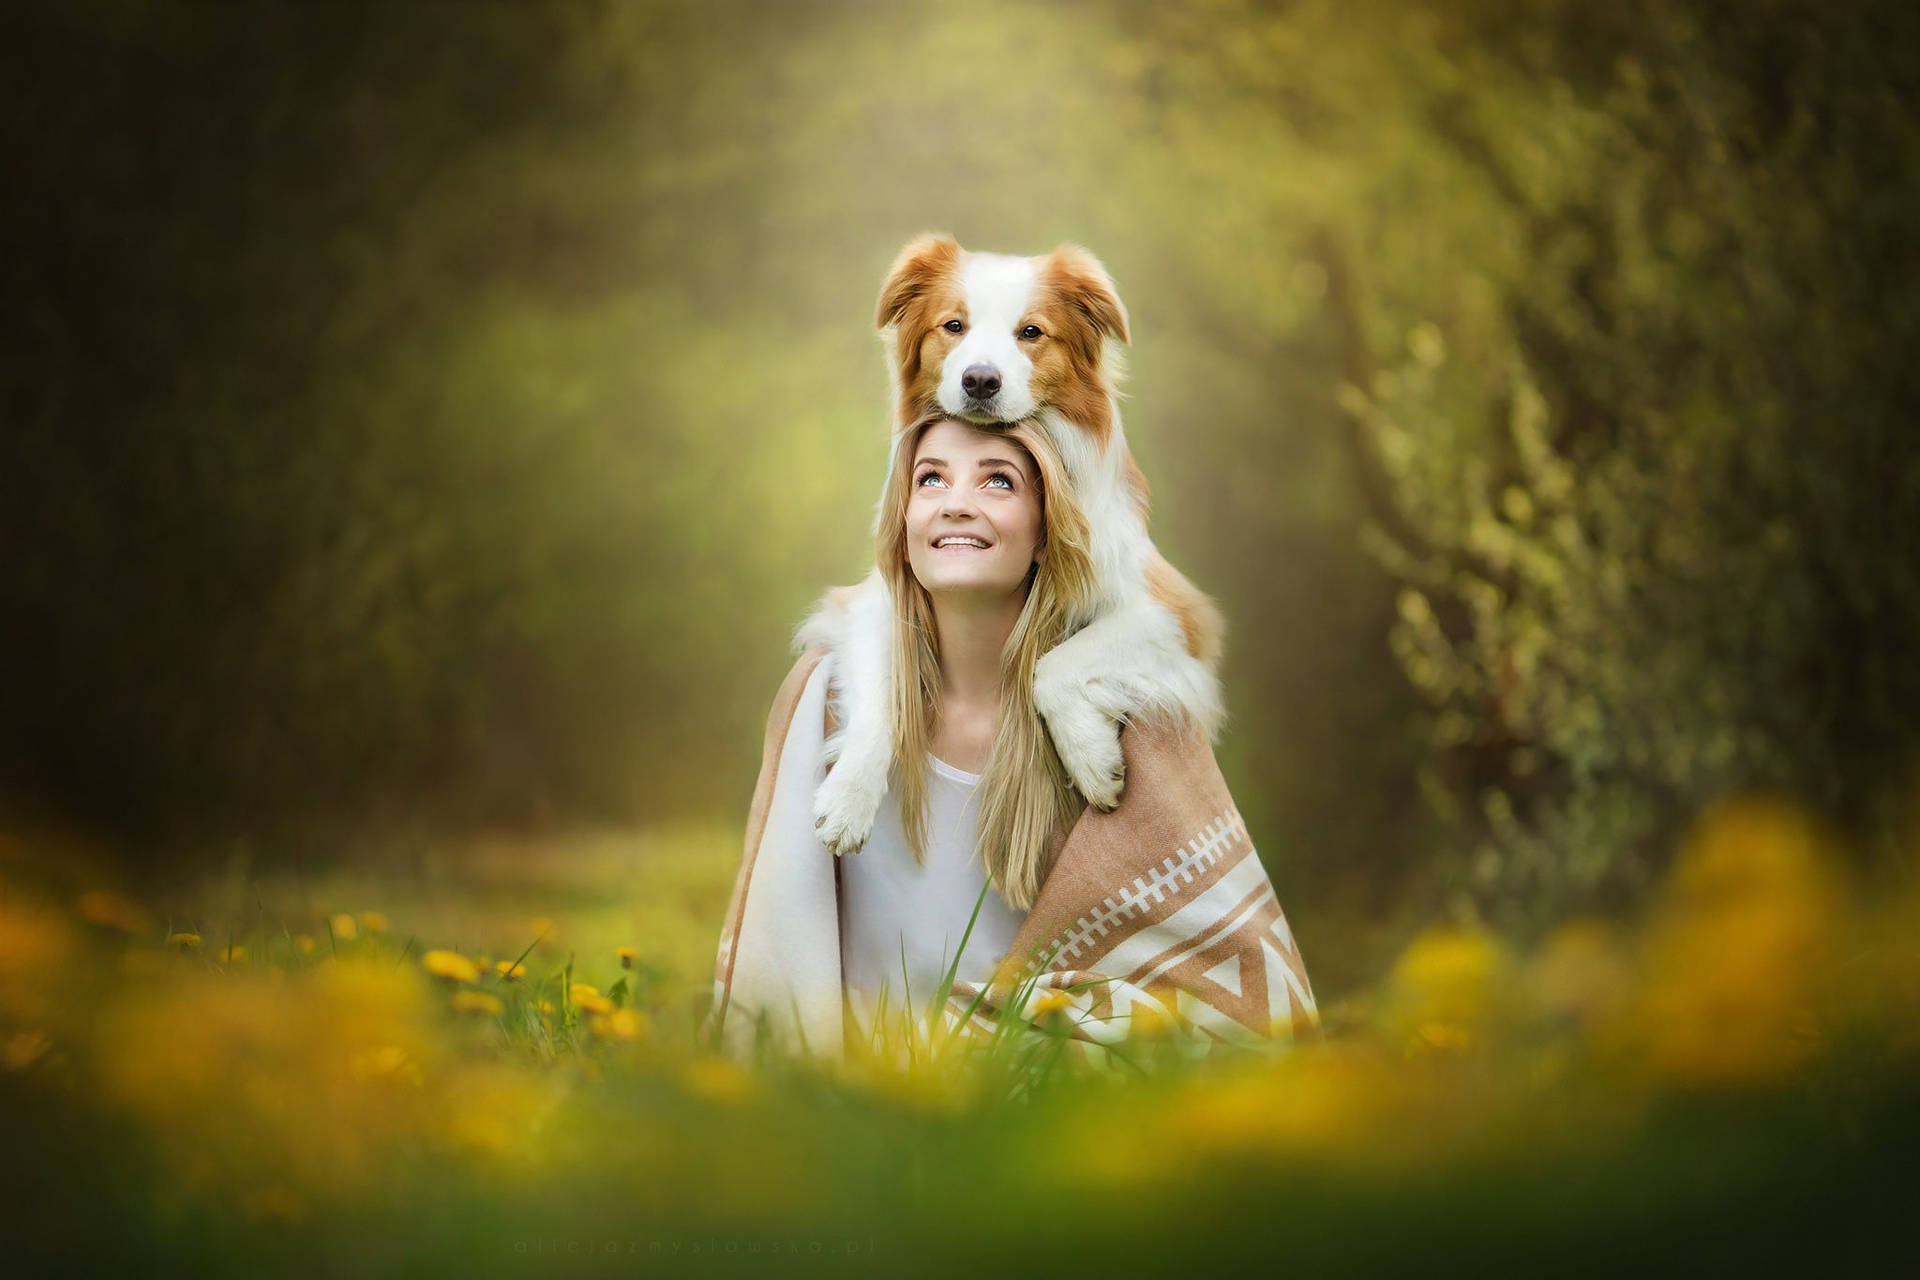 Dog And Girl Sunny Day Wallpaper